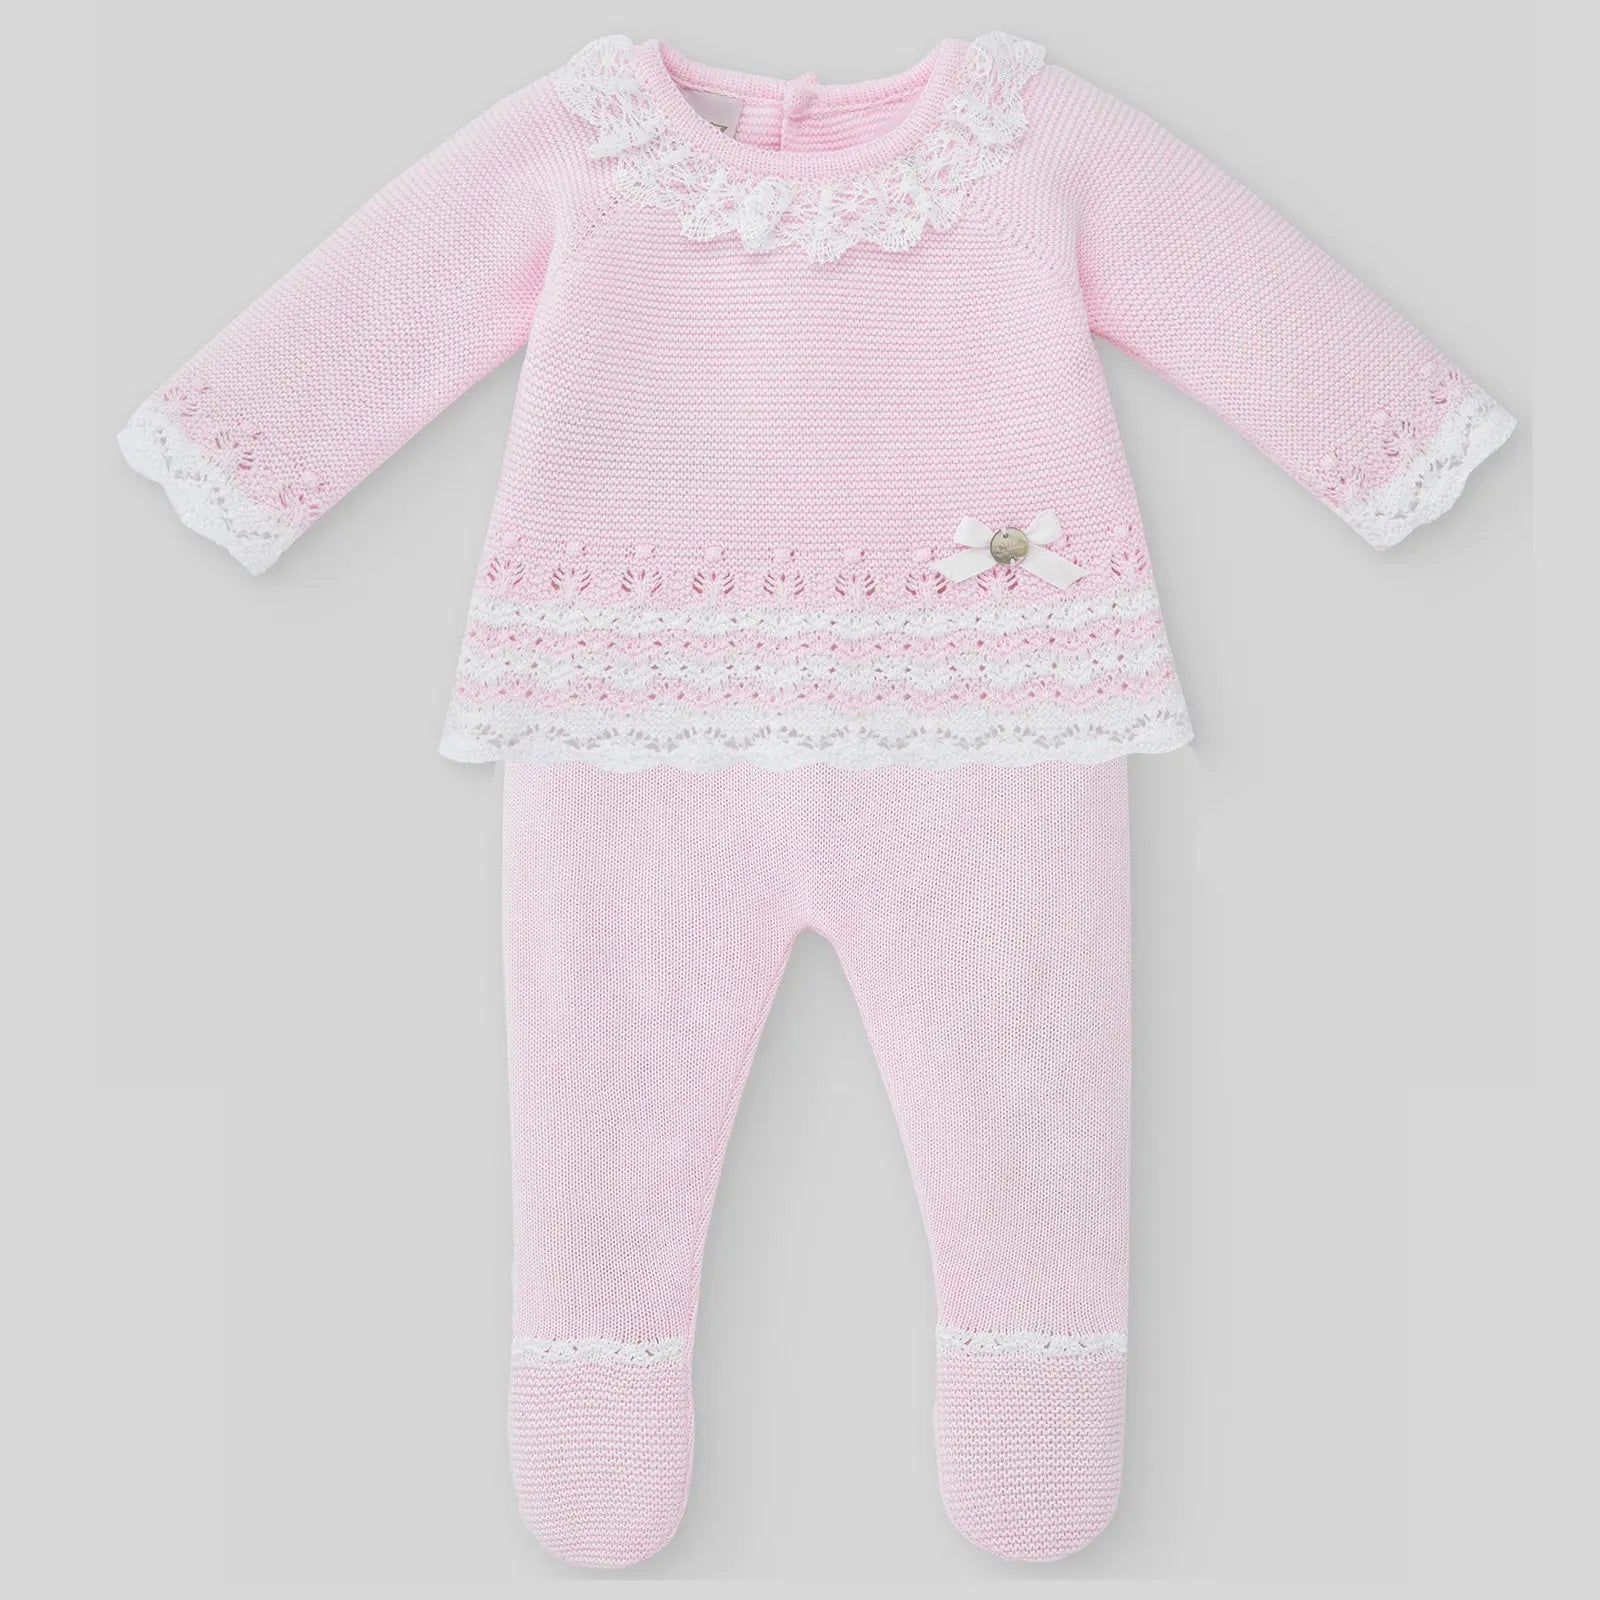 Blue Almonds Ltd Girl's Knitted Footed Set in Chalk Pink & White paz rodriguez